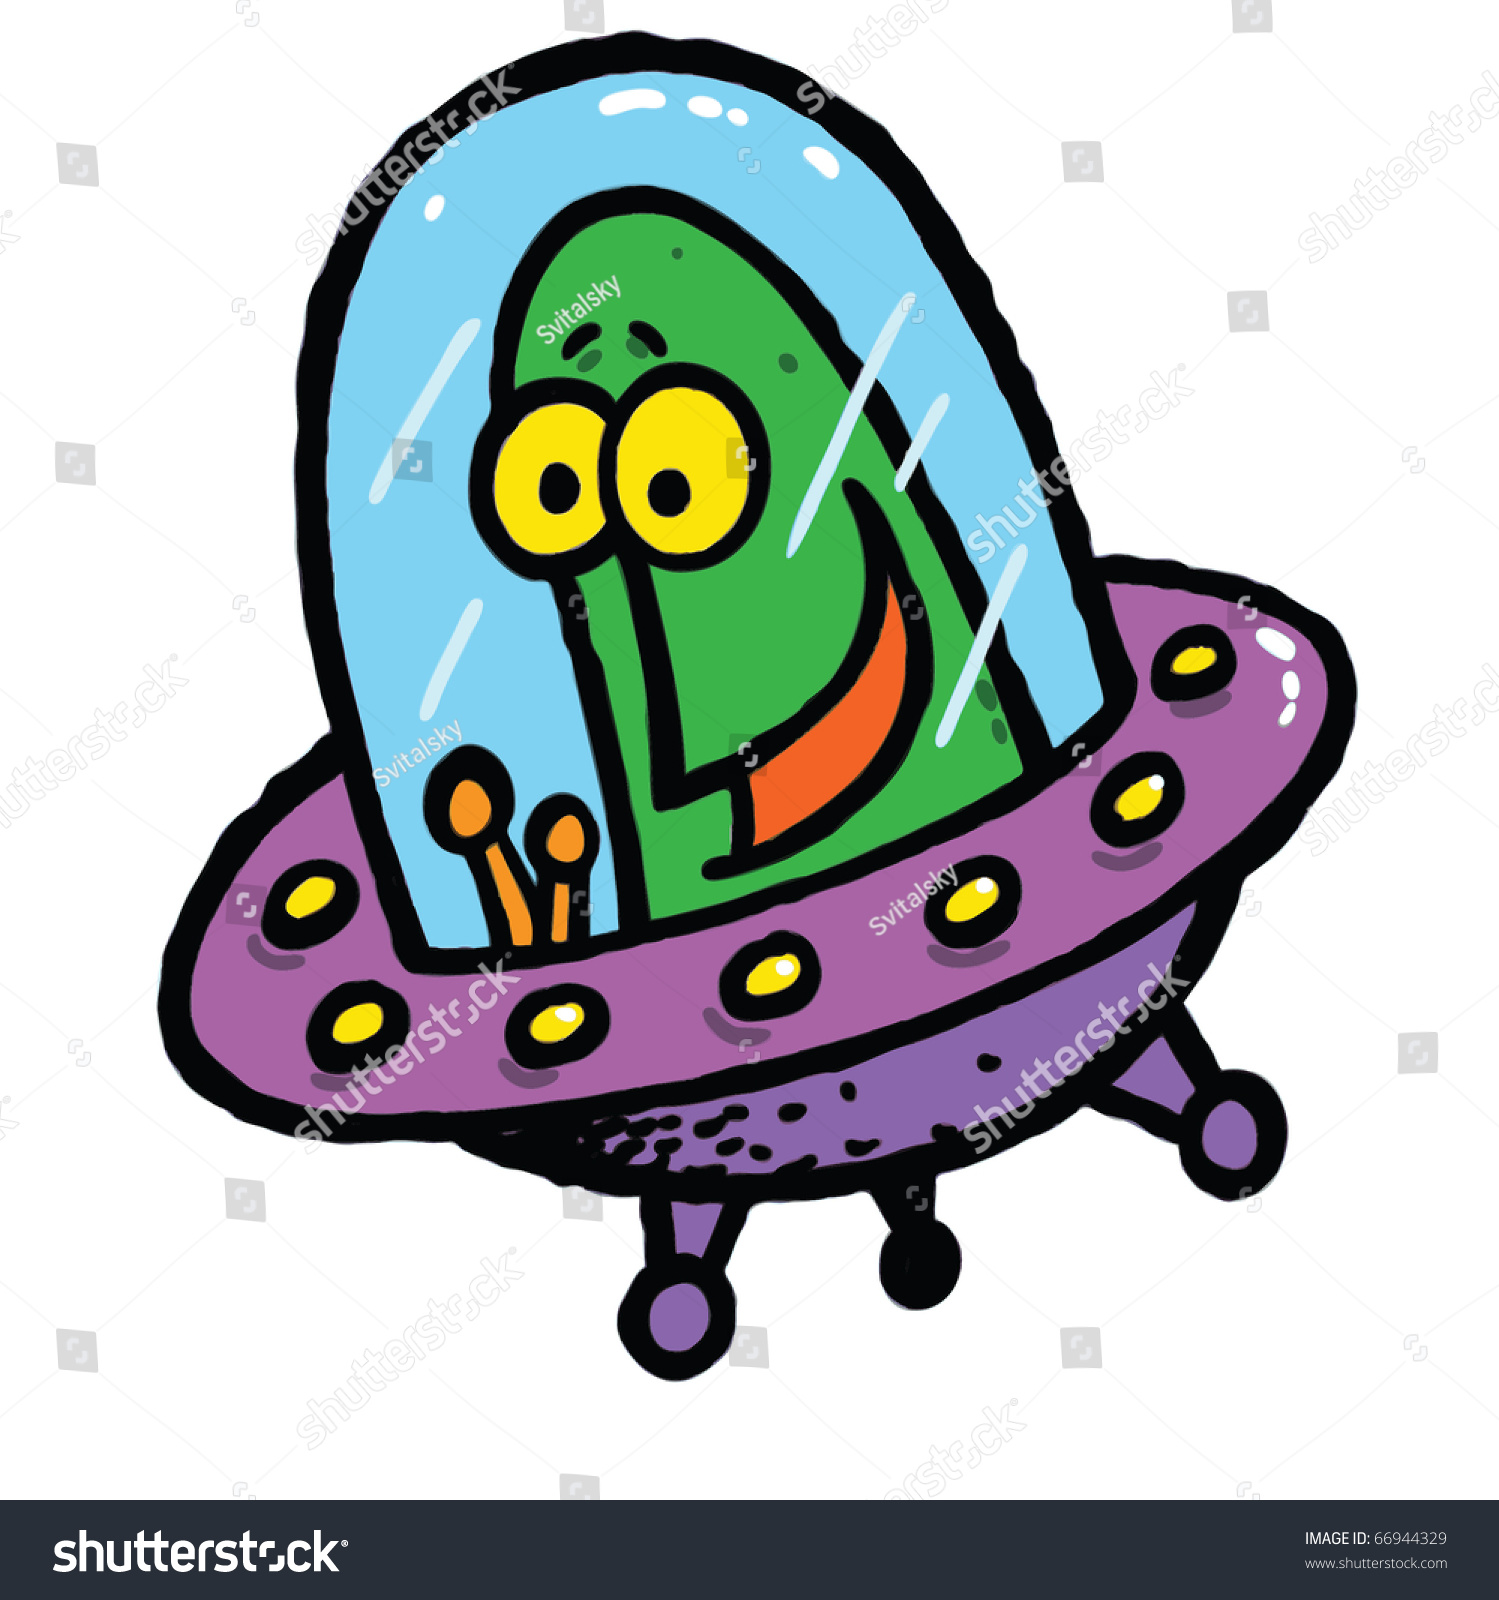 clipart flying saucer - photo #42